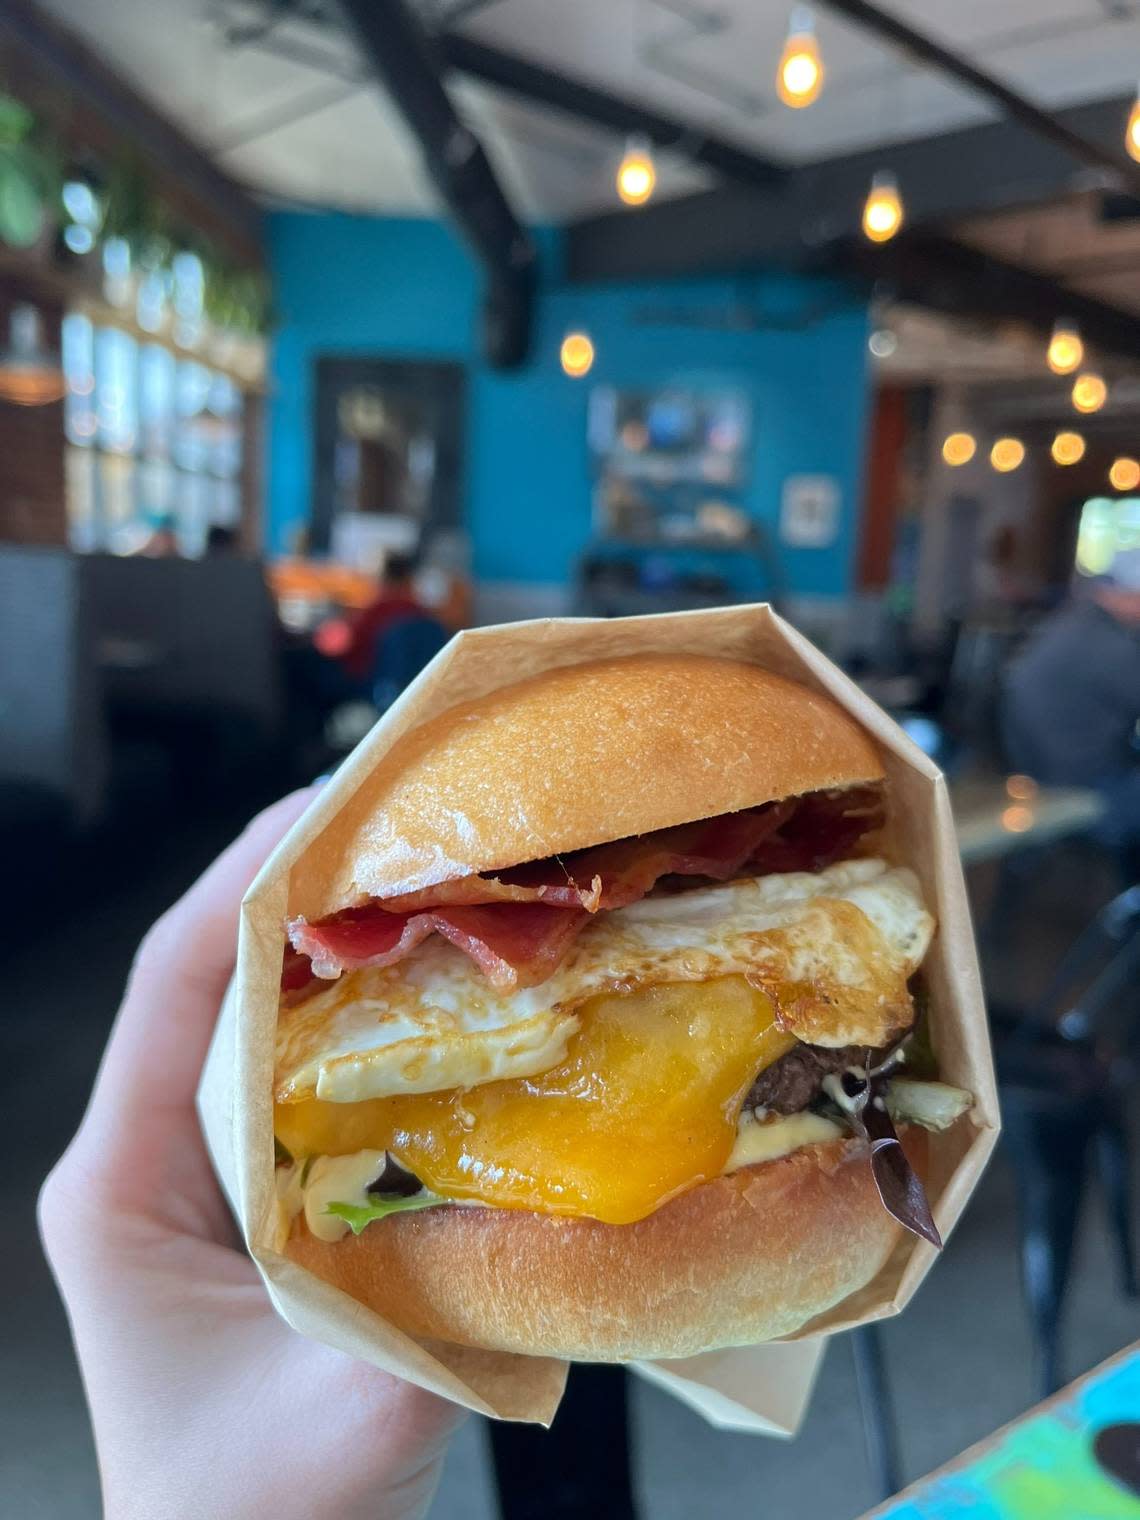 The burger at DV8 Kitchen on Midland and Third is a Black Angus patty topped with a fried egg, cheese, ham and more on a brioche bun or biscuit made in house.